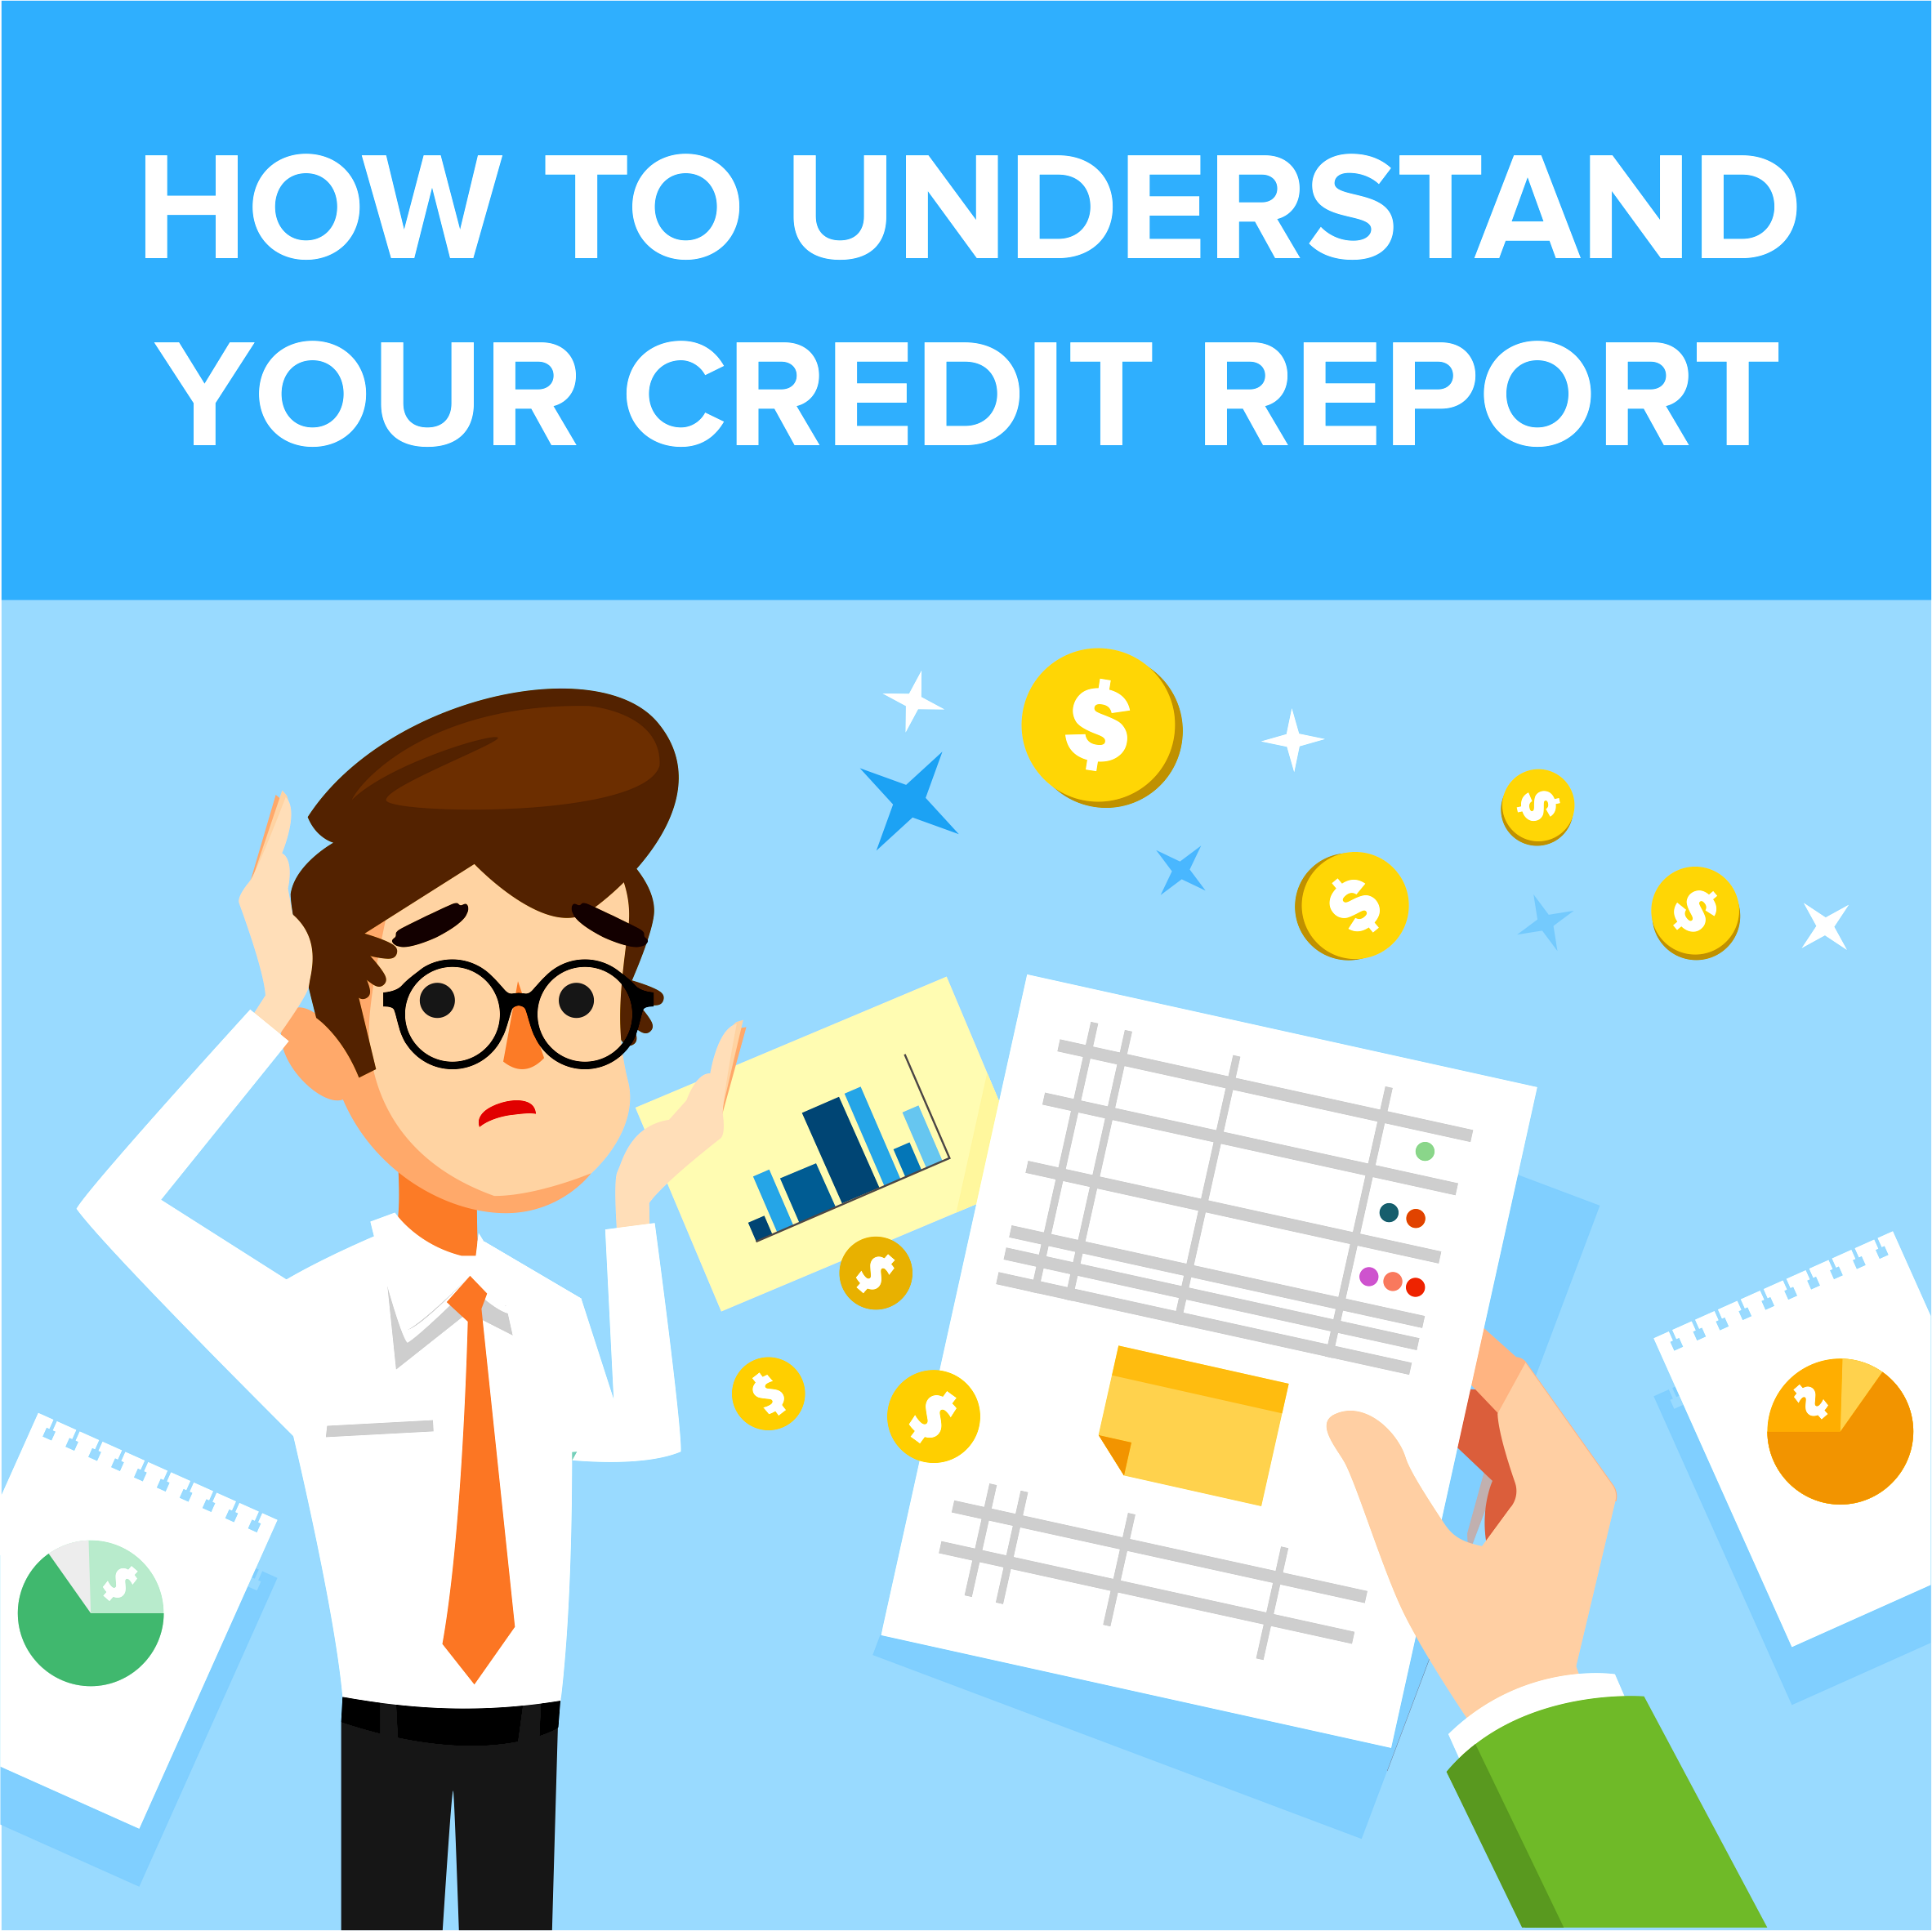 How to Understand Your Credit Report